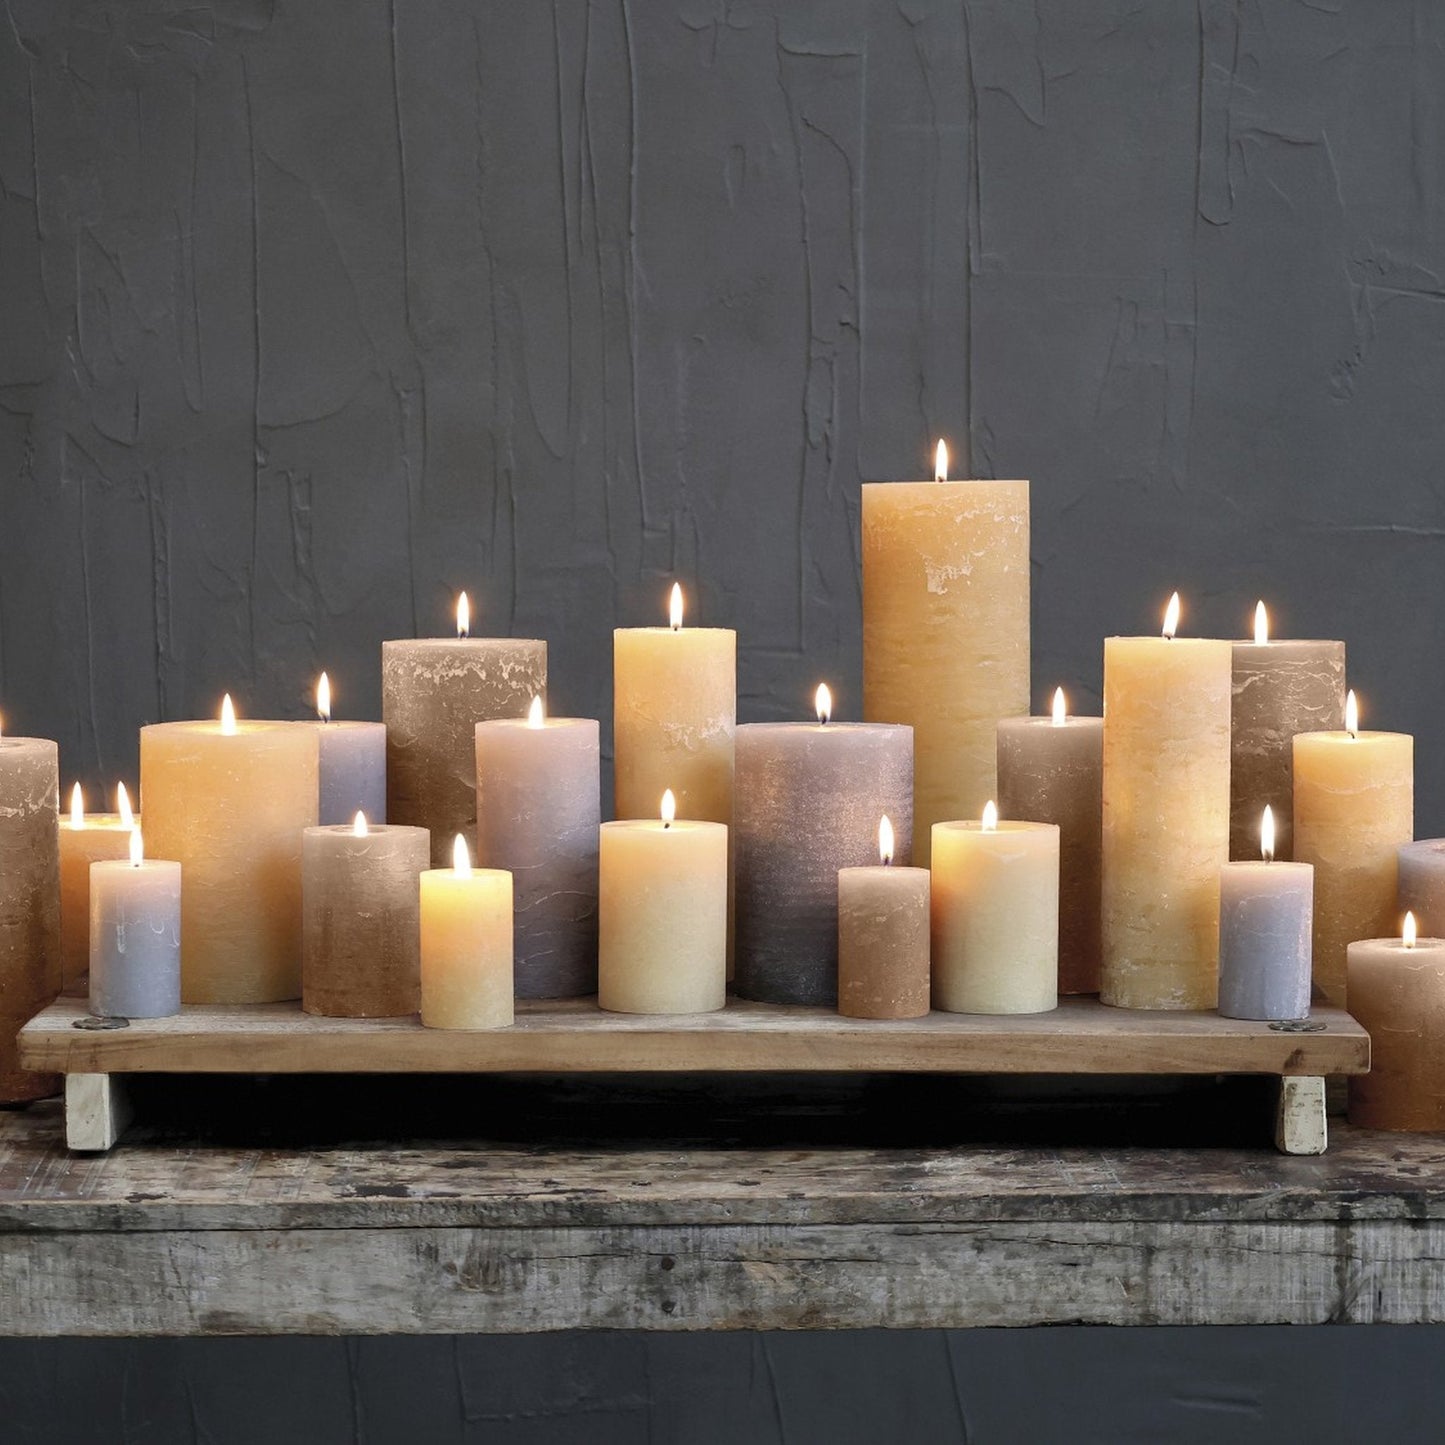 French Grey Rustic Pillar Candle 40 hours - Bumble Living